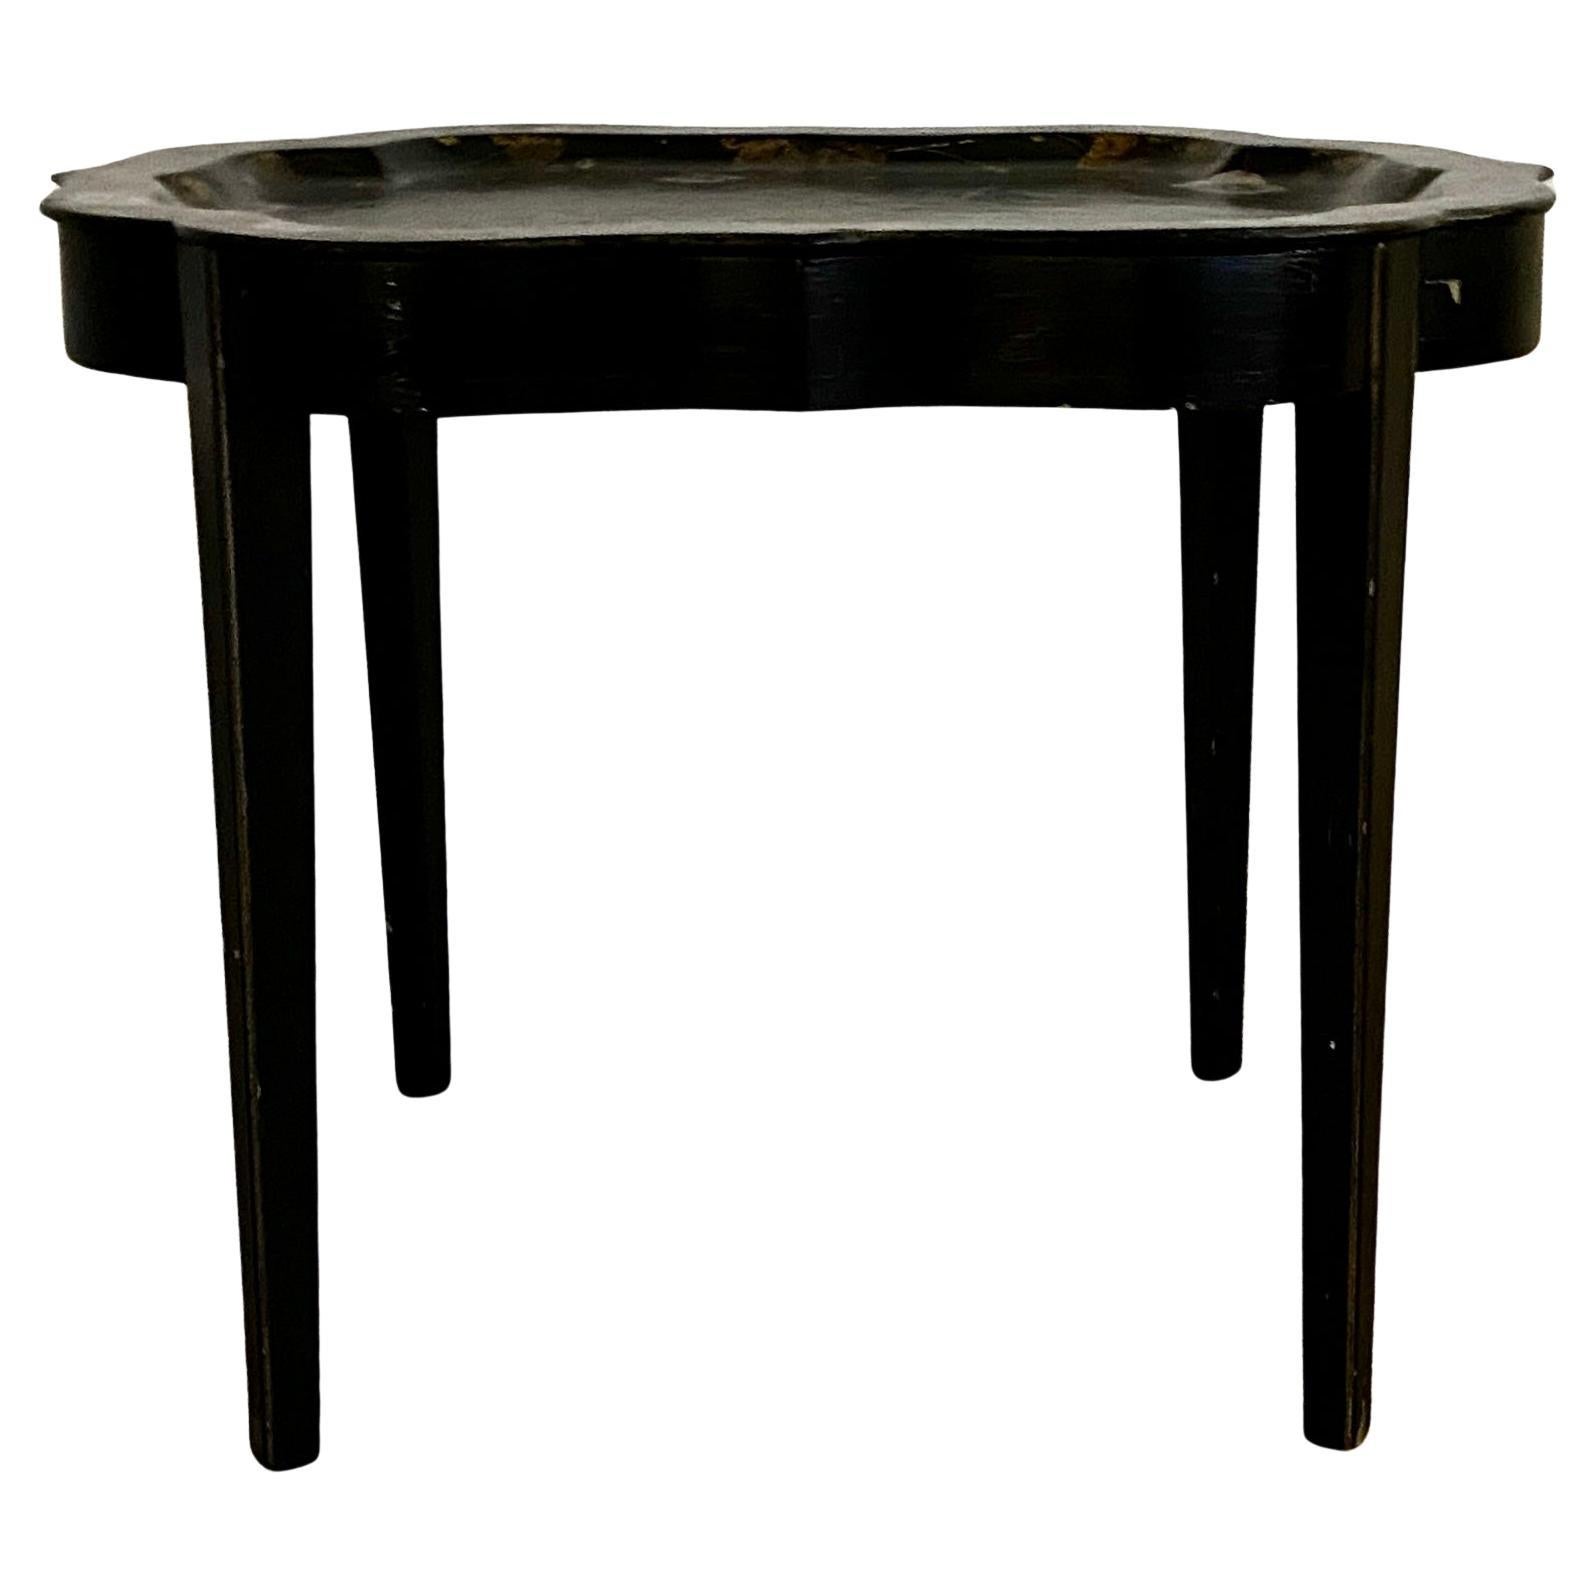 Danish Black-Painted Flower Decorated Coffee Tray Table, circa 1920s For Sale 1